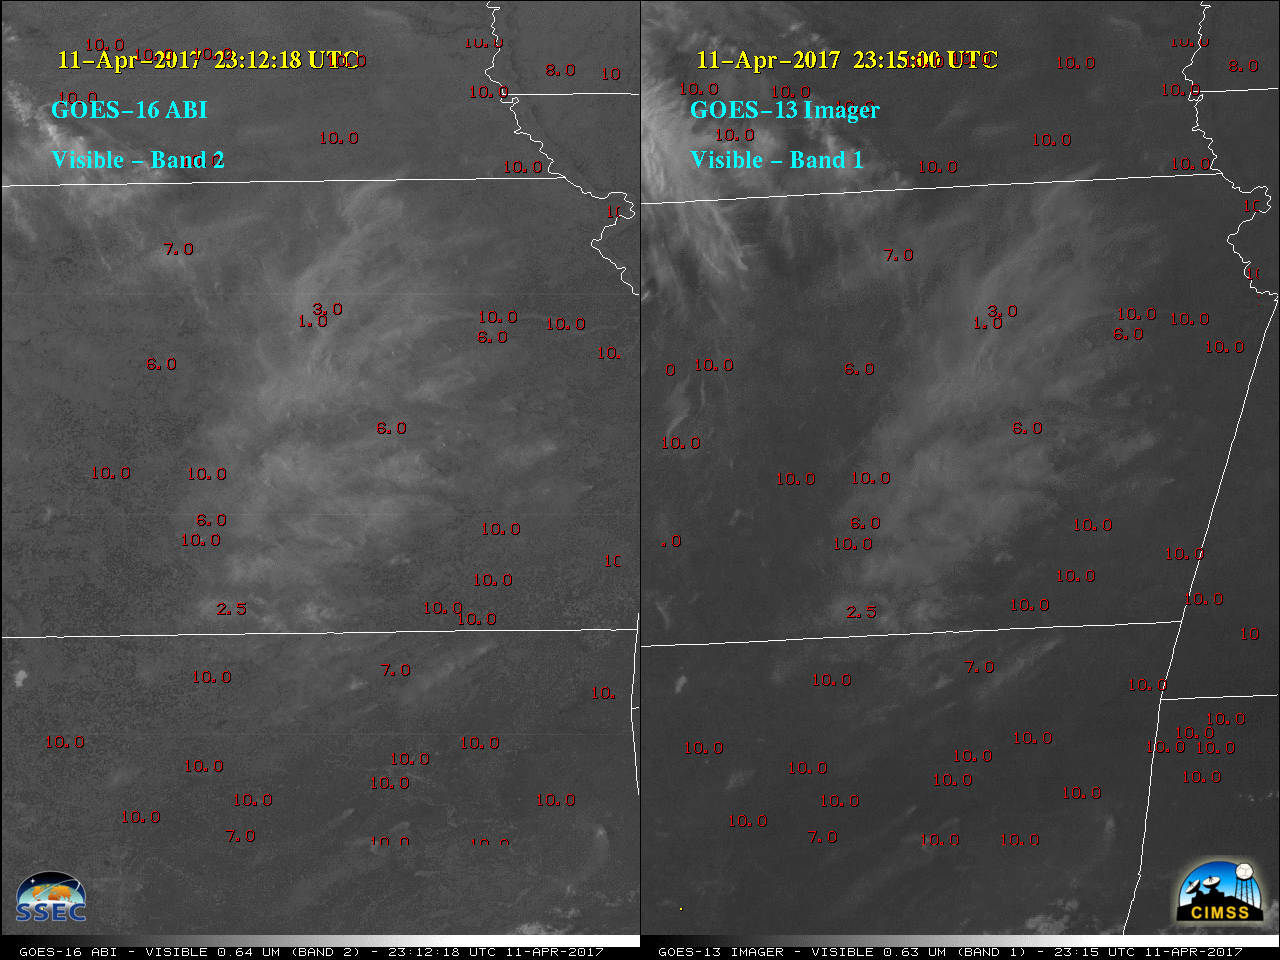 GOES-16 Visible (0.64 µm, left) and GOES-13 Visible (0.63 µm, right) images, with hourly reports of surface visibility (statute miles, red) [click to play animation]